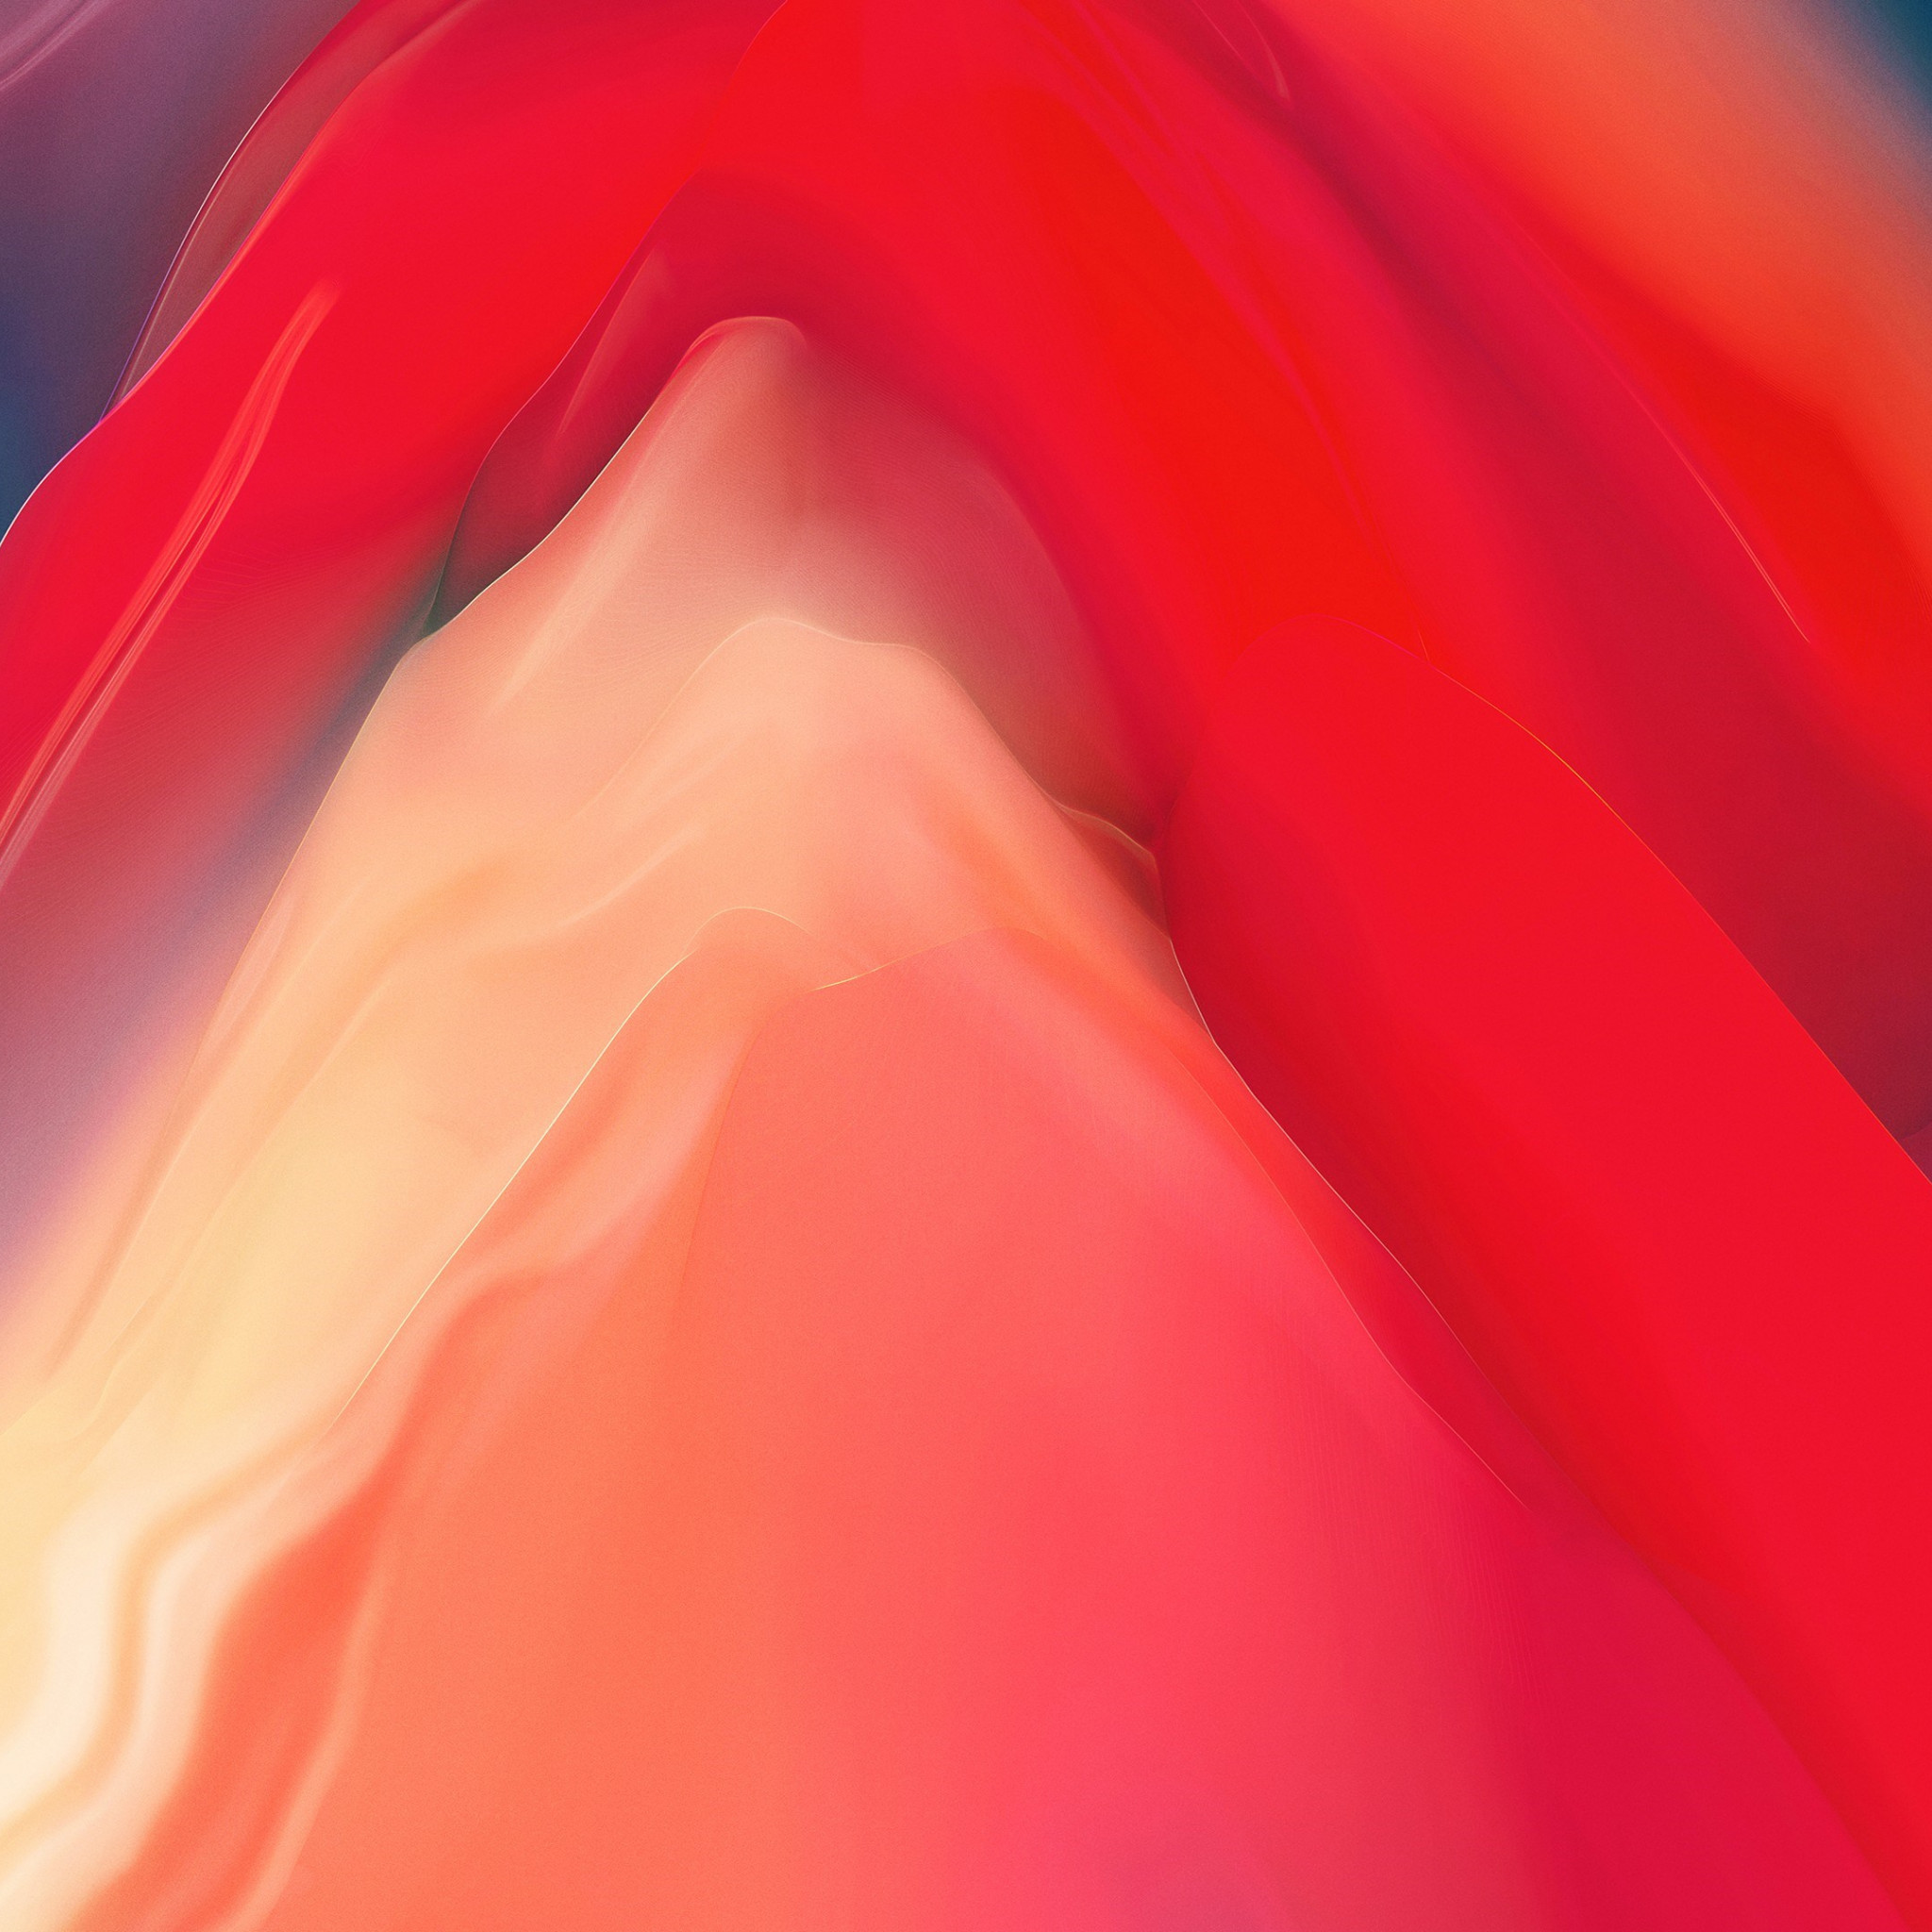 Download wallpaper: OnePlus 6T, abstract 2048x2048